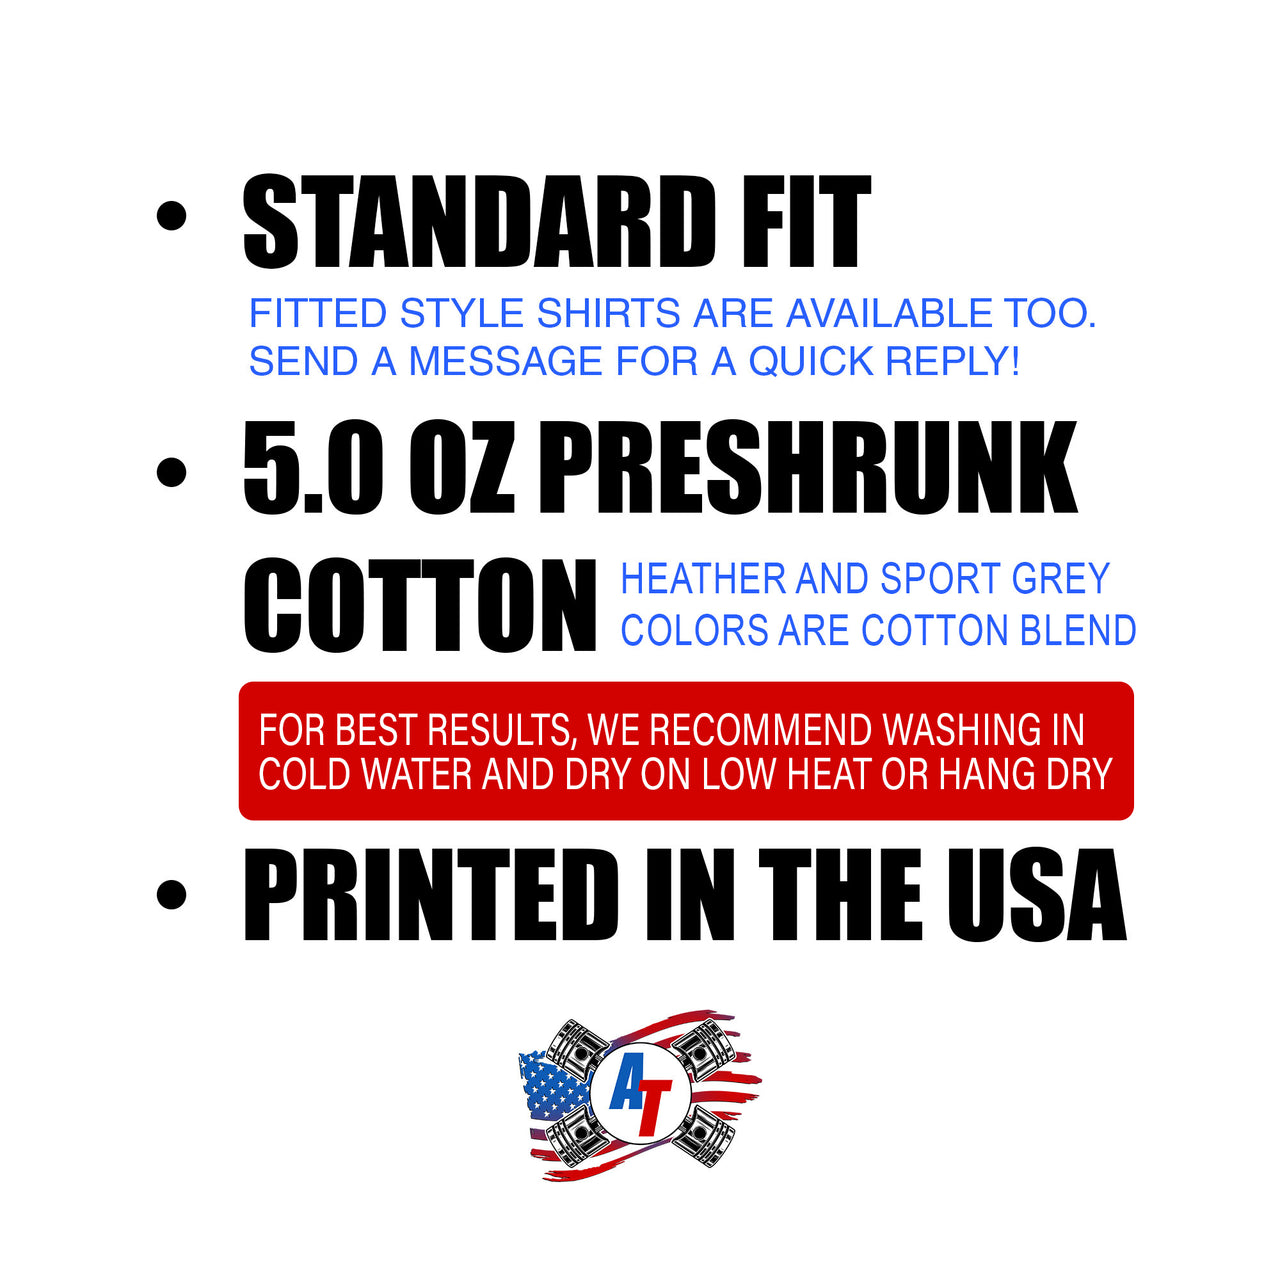 t-shirt garment care instructions and other information